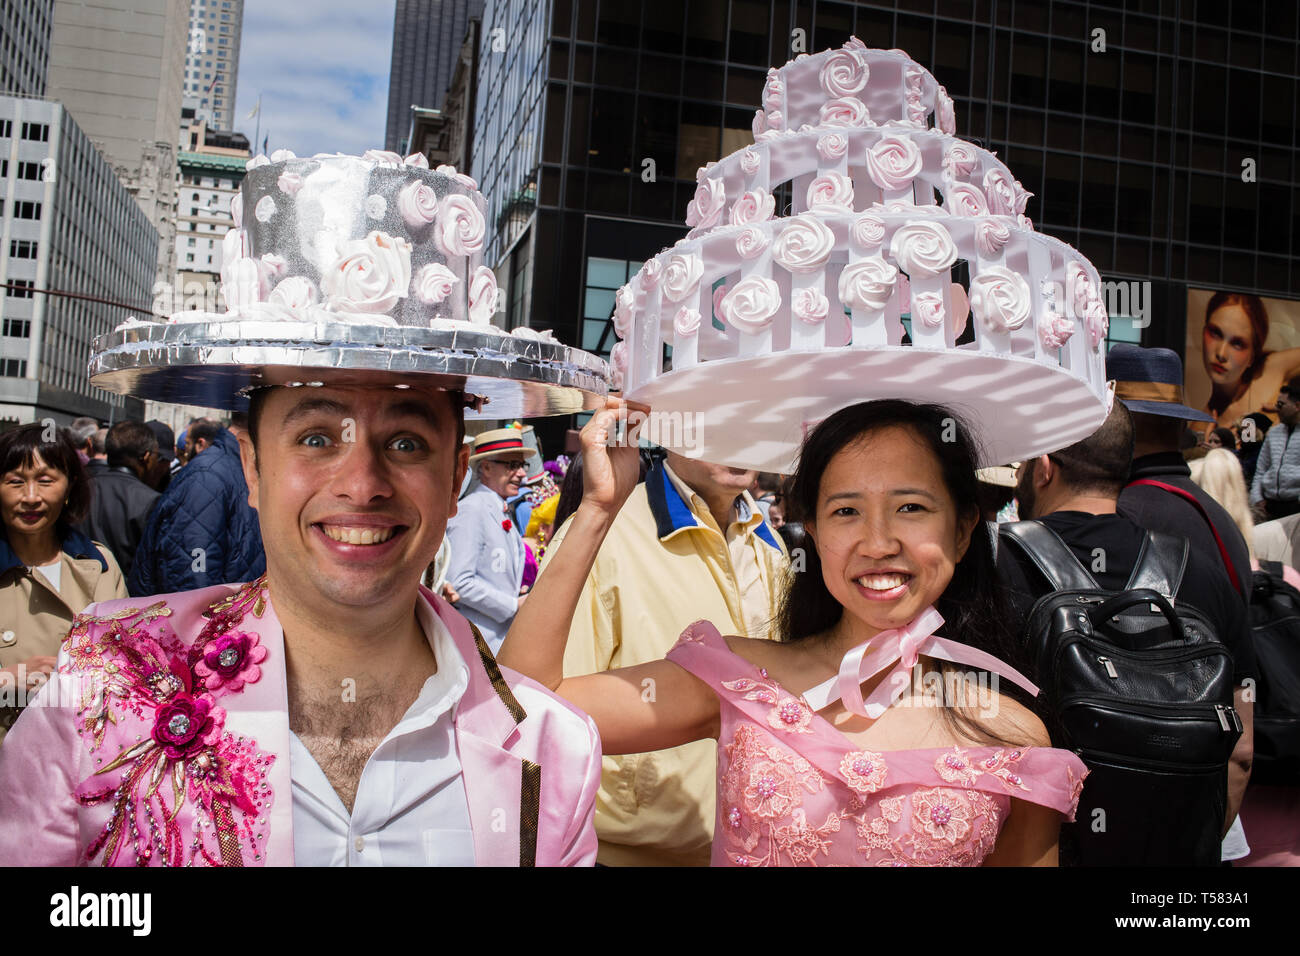 New York, NY - 21 April 2019. A  couple with ornate wedding-cake hats at the Easter Bonnet Parade and Festival on New York's Fifth Avenue. Stock Photo